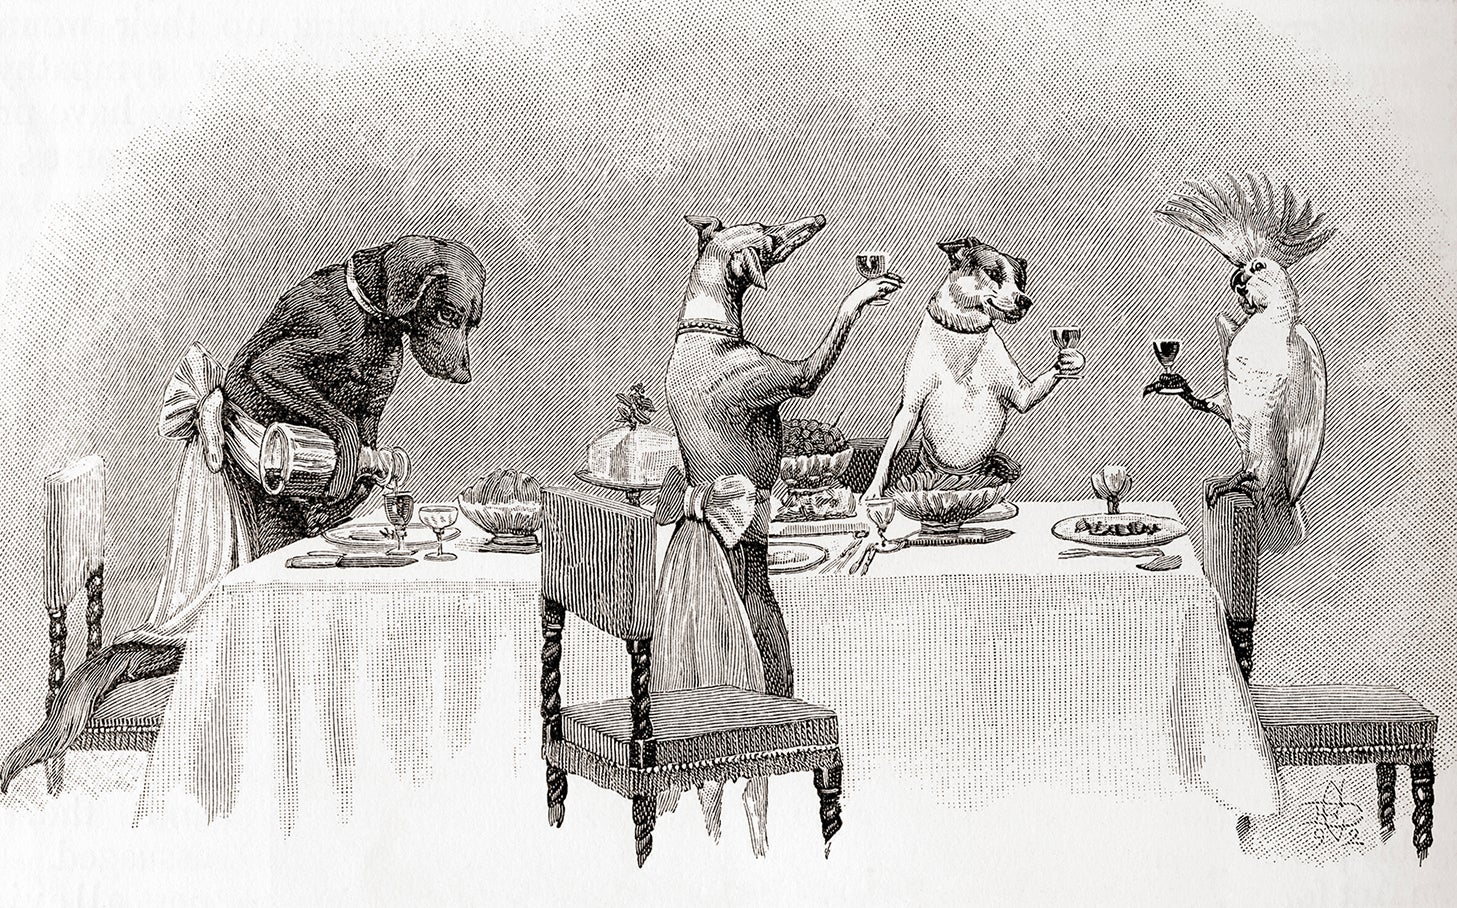 From the NS archive: Dog’s dinner